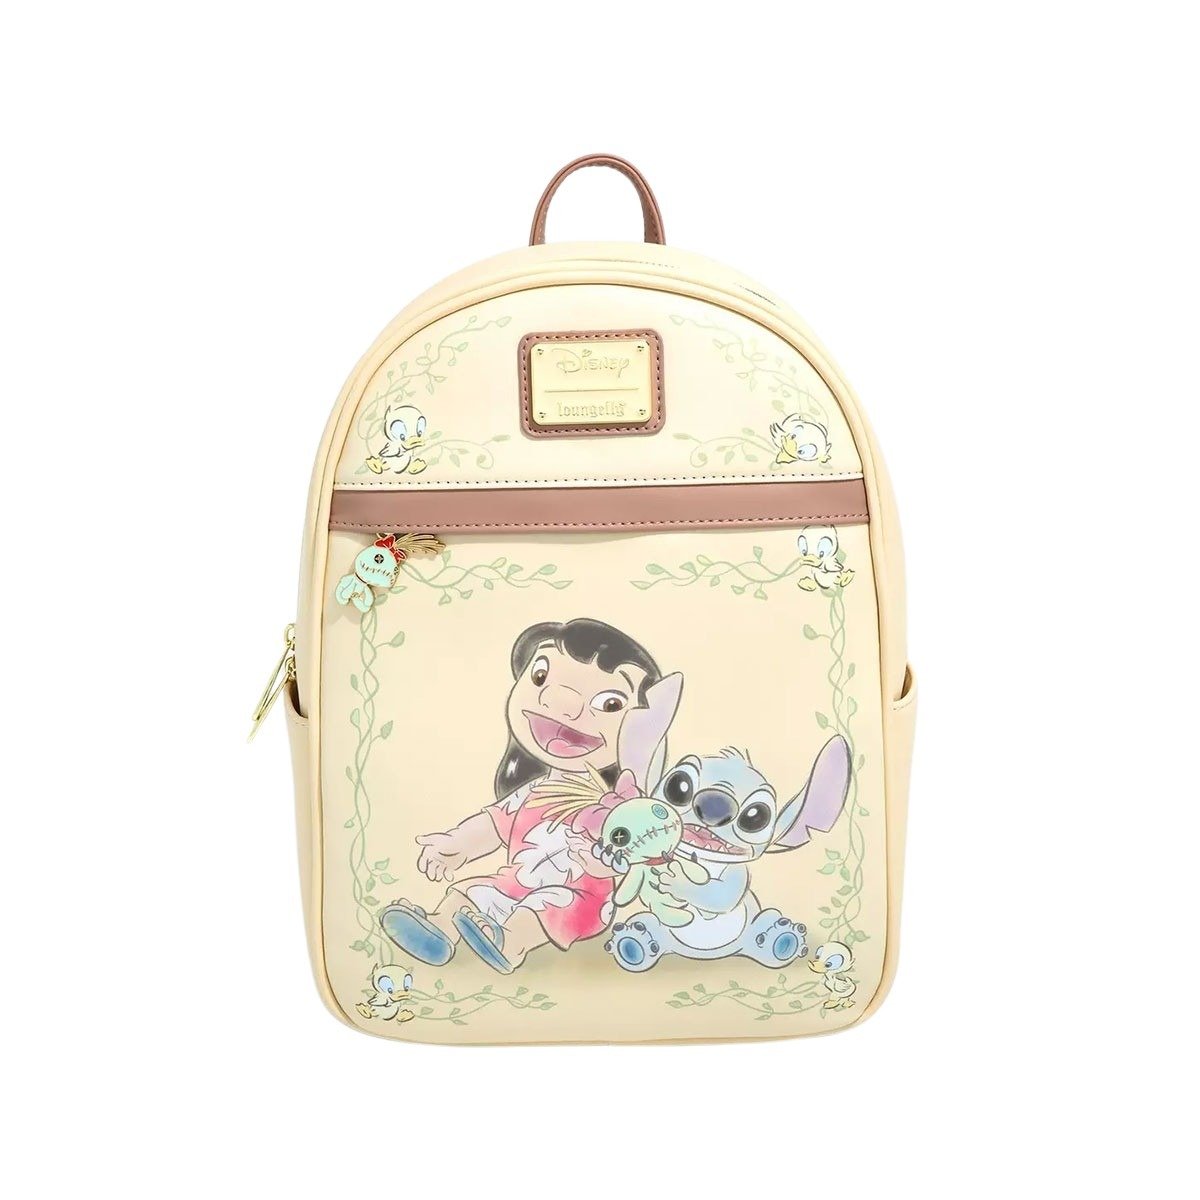 Front of the backpack: Featuring Lilo and Stitch with a stitched doll, surrounded by decorative foliage and small ducklings.